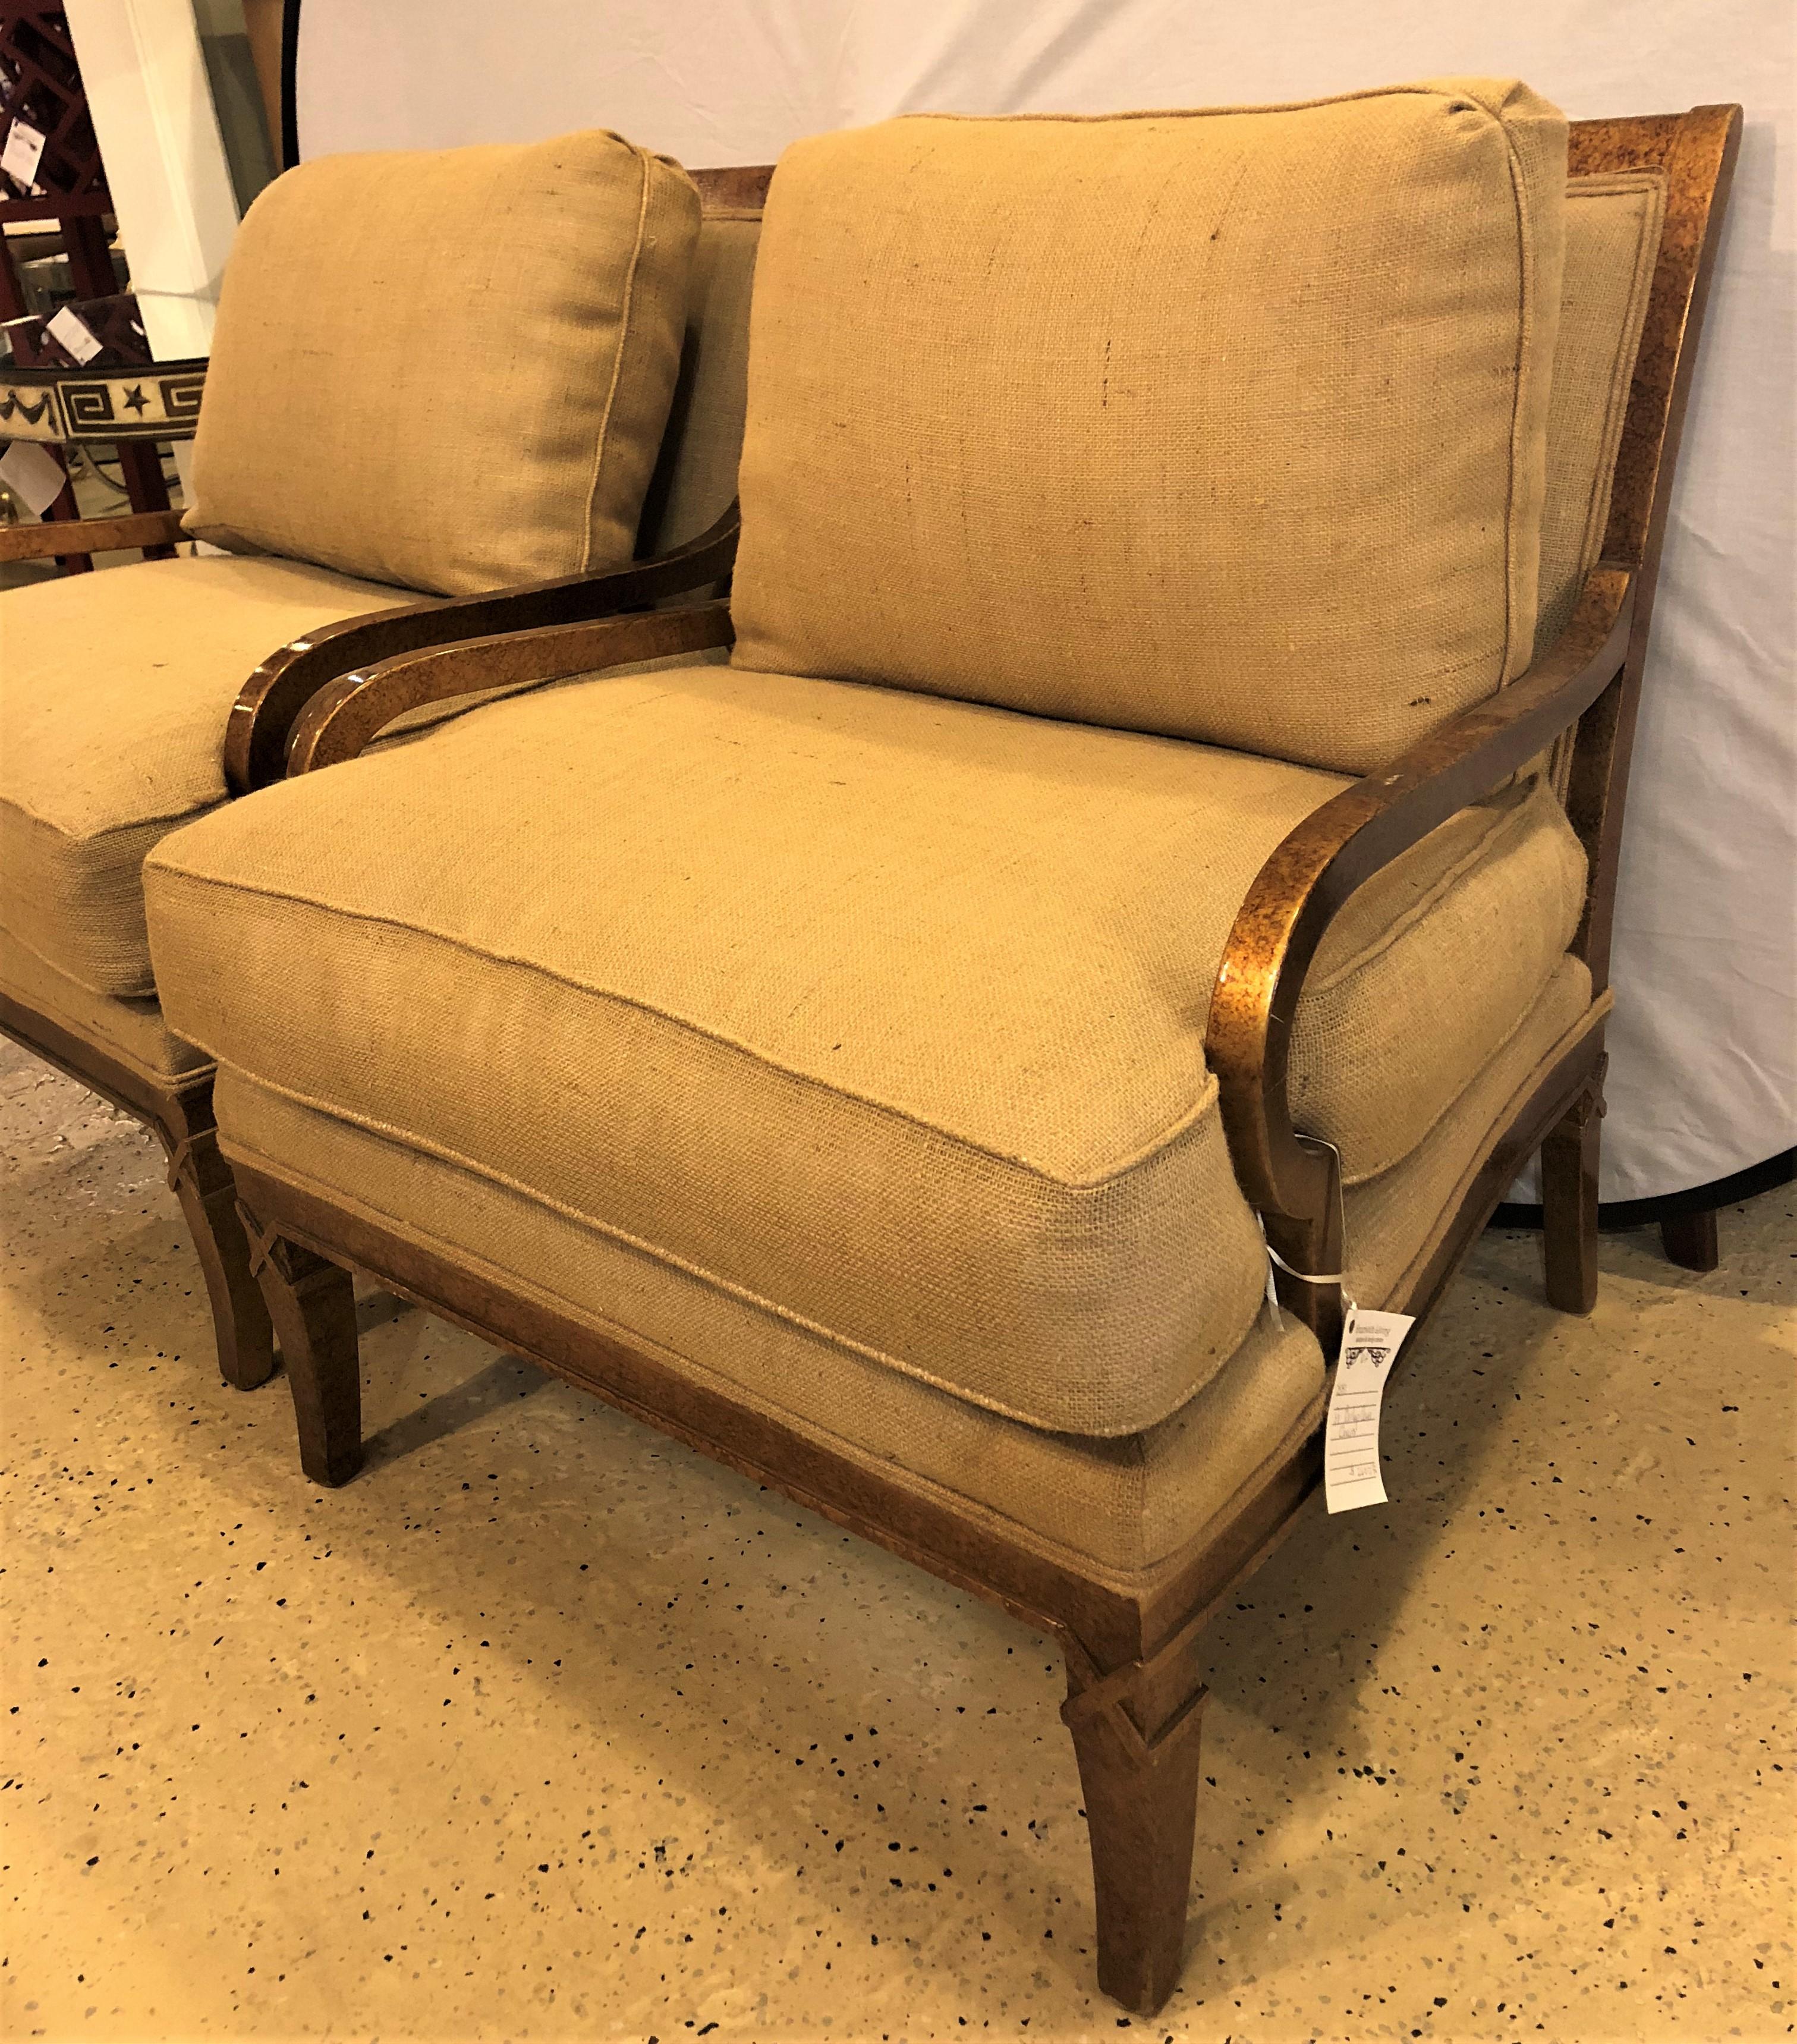 Pair of Burlap faux marbleized bergère or armchairs in the Hollywood Regency style. These very stylish and sleek lounge chairs with their X-form leg tops are certain to add class and elegance to any room in the home or office. Strong, clean and